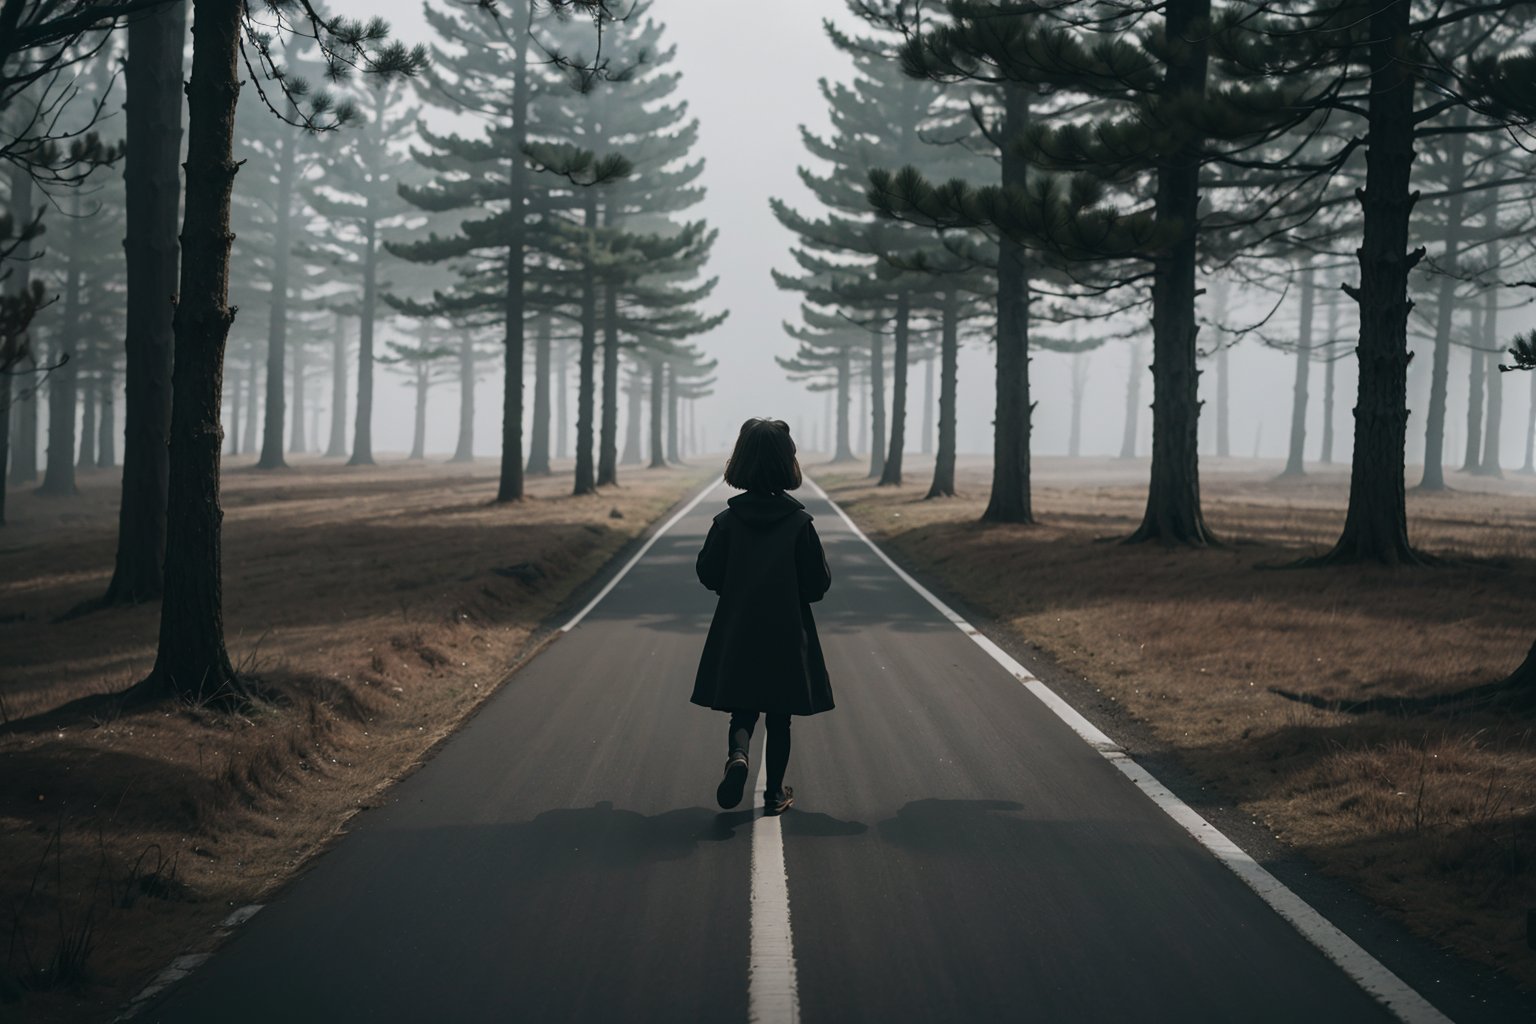 Highest quality, rich details, masterpiece, dark forest, spooky atmosphere, a little girl walking alone on the road, hugging a plush teddy bear, the foggy road with no end in sight,